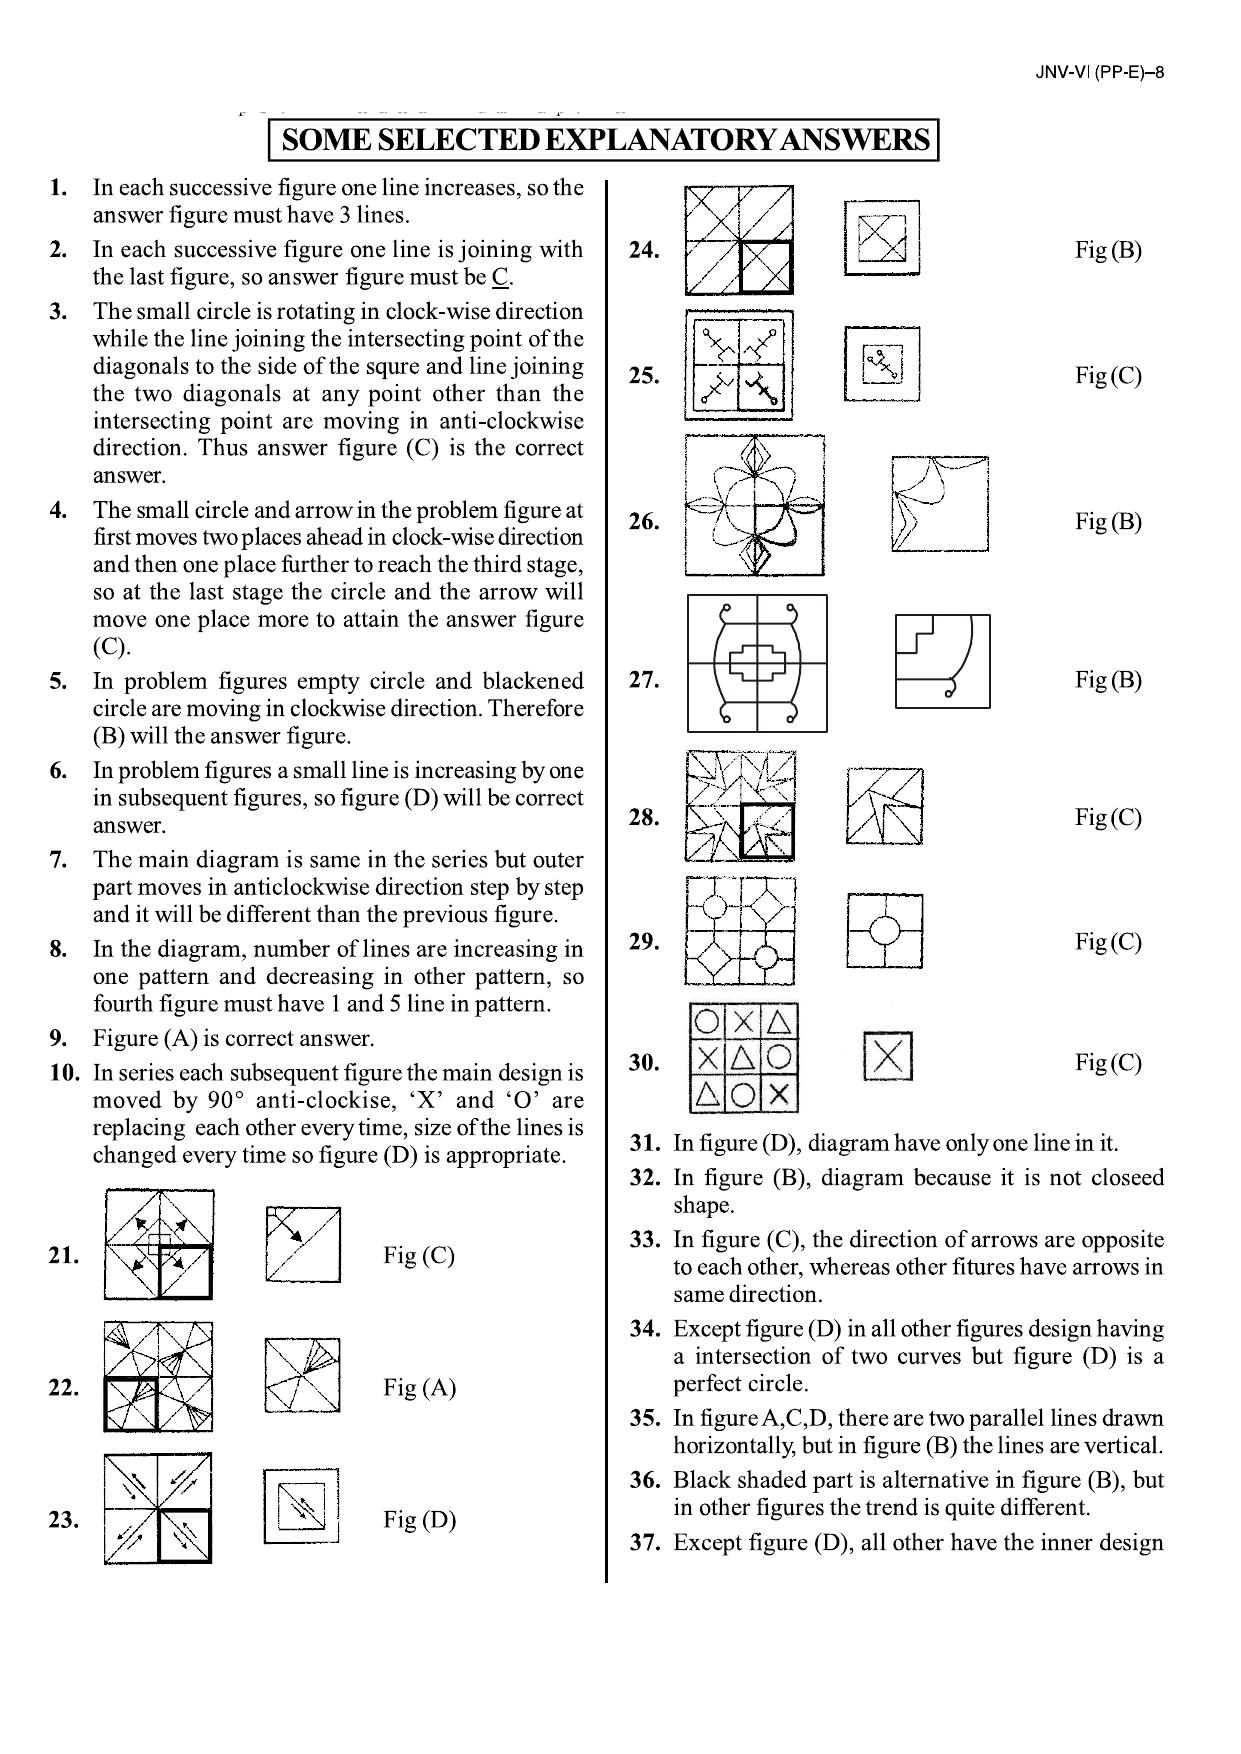 JNVST Class 6 2010 Question Paper with Solutions - Page 8